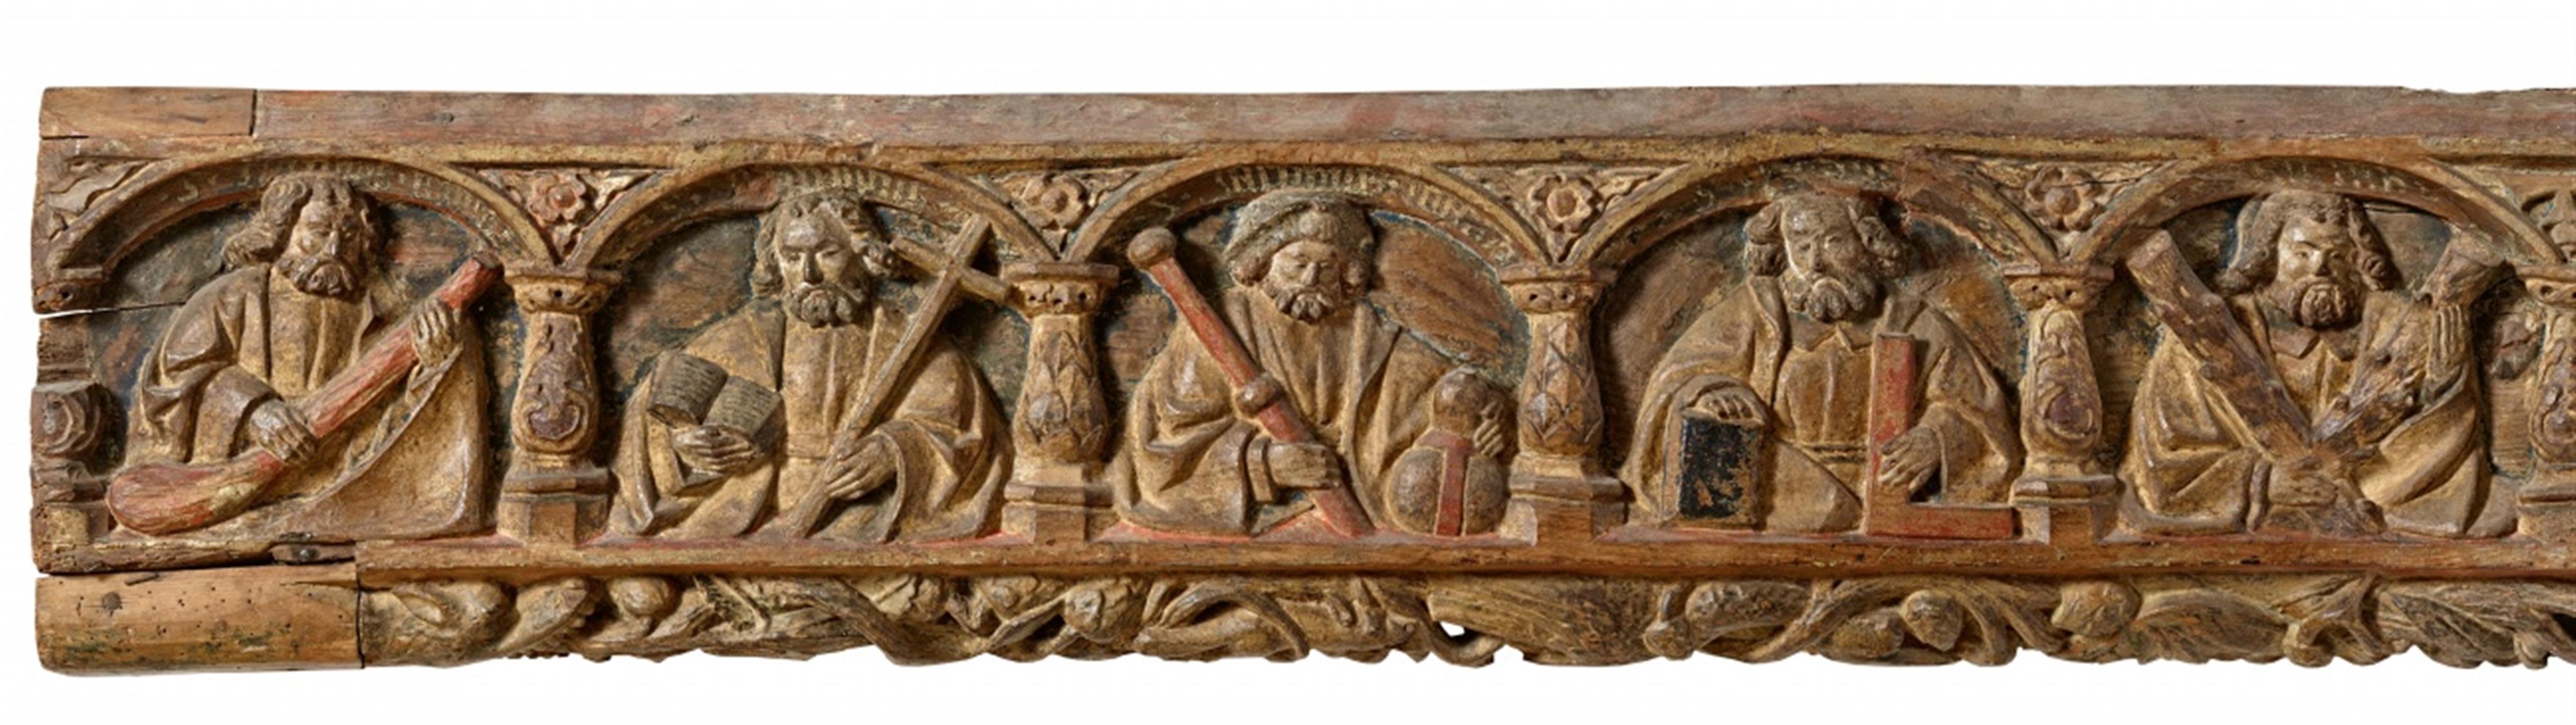 Probably Lower Rhine Region circa 1530 - A carved wooden relief of Christ and the Apostles (apostle beam), probably Lower Rhine-Region, circa 1530 - image-2